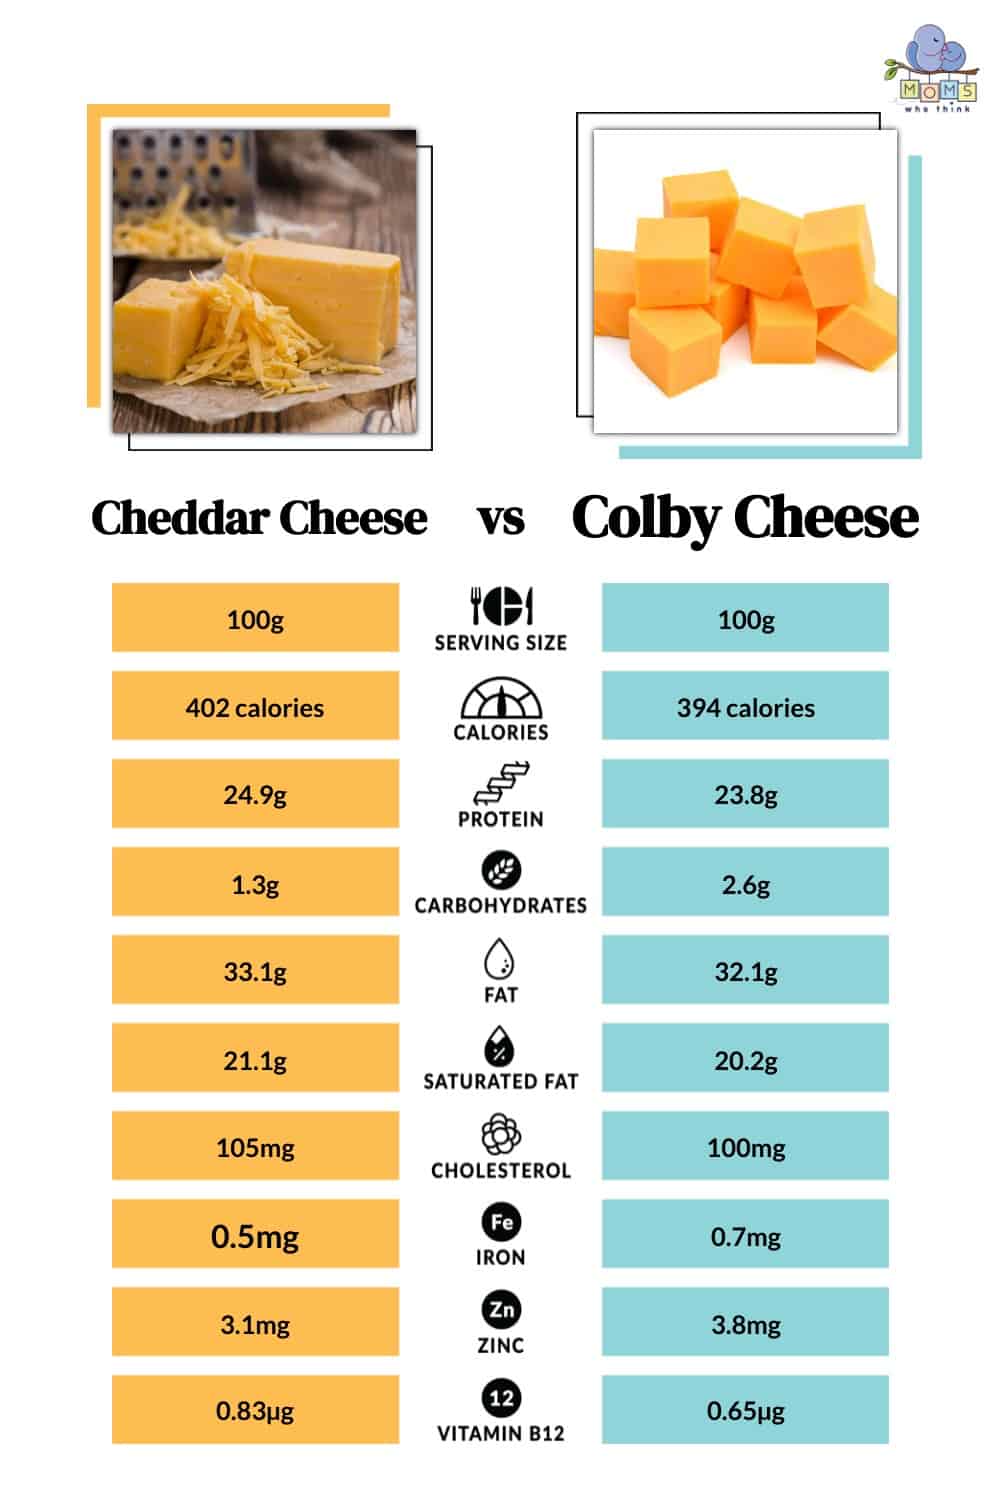 Cheddar Cheese vs Colby Cheese Nutrition